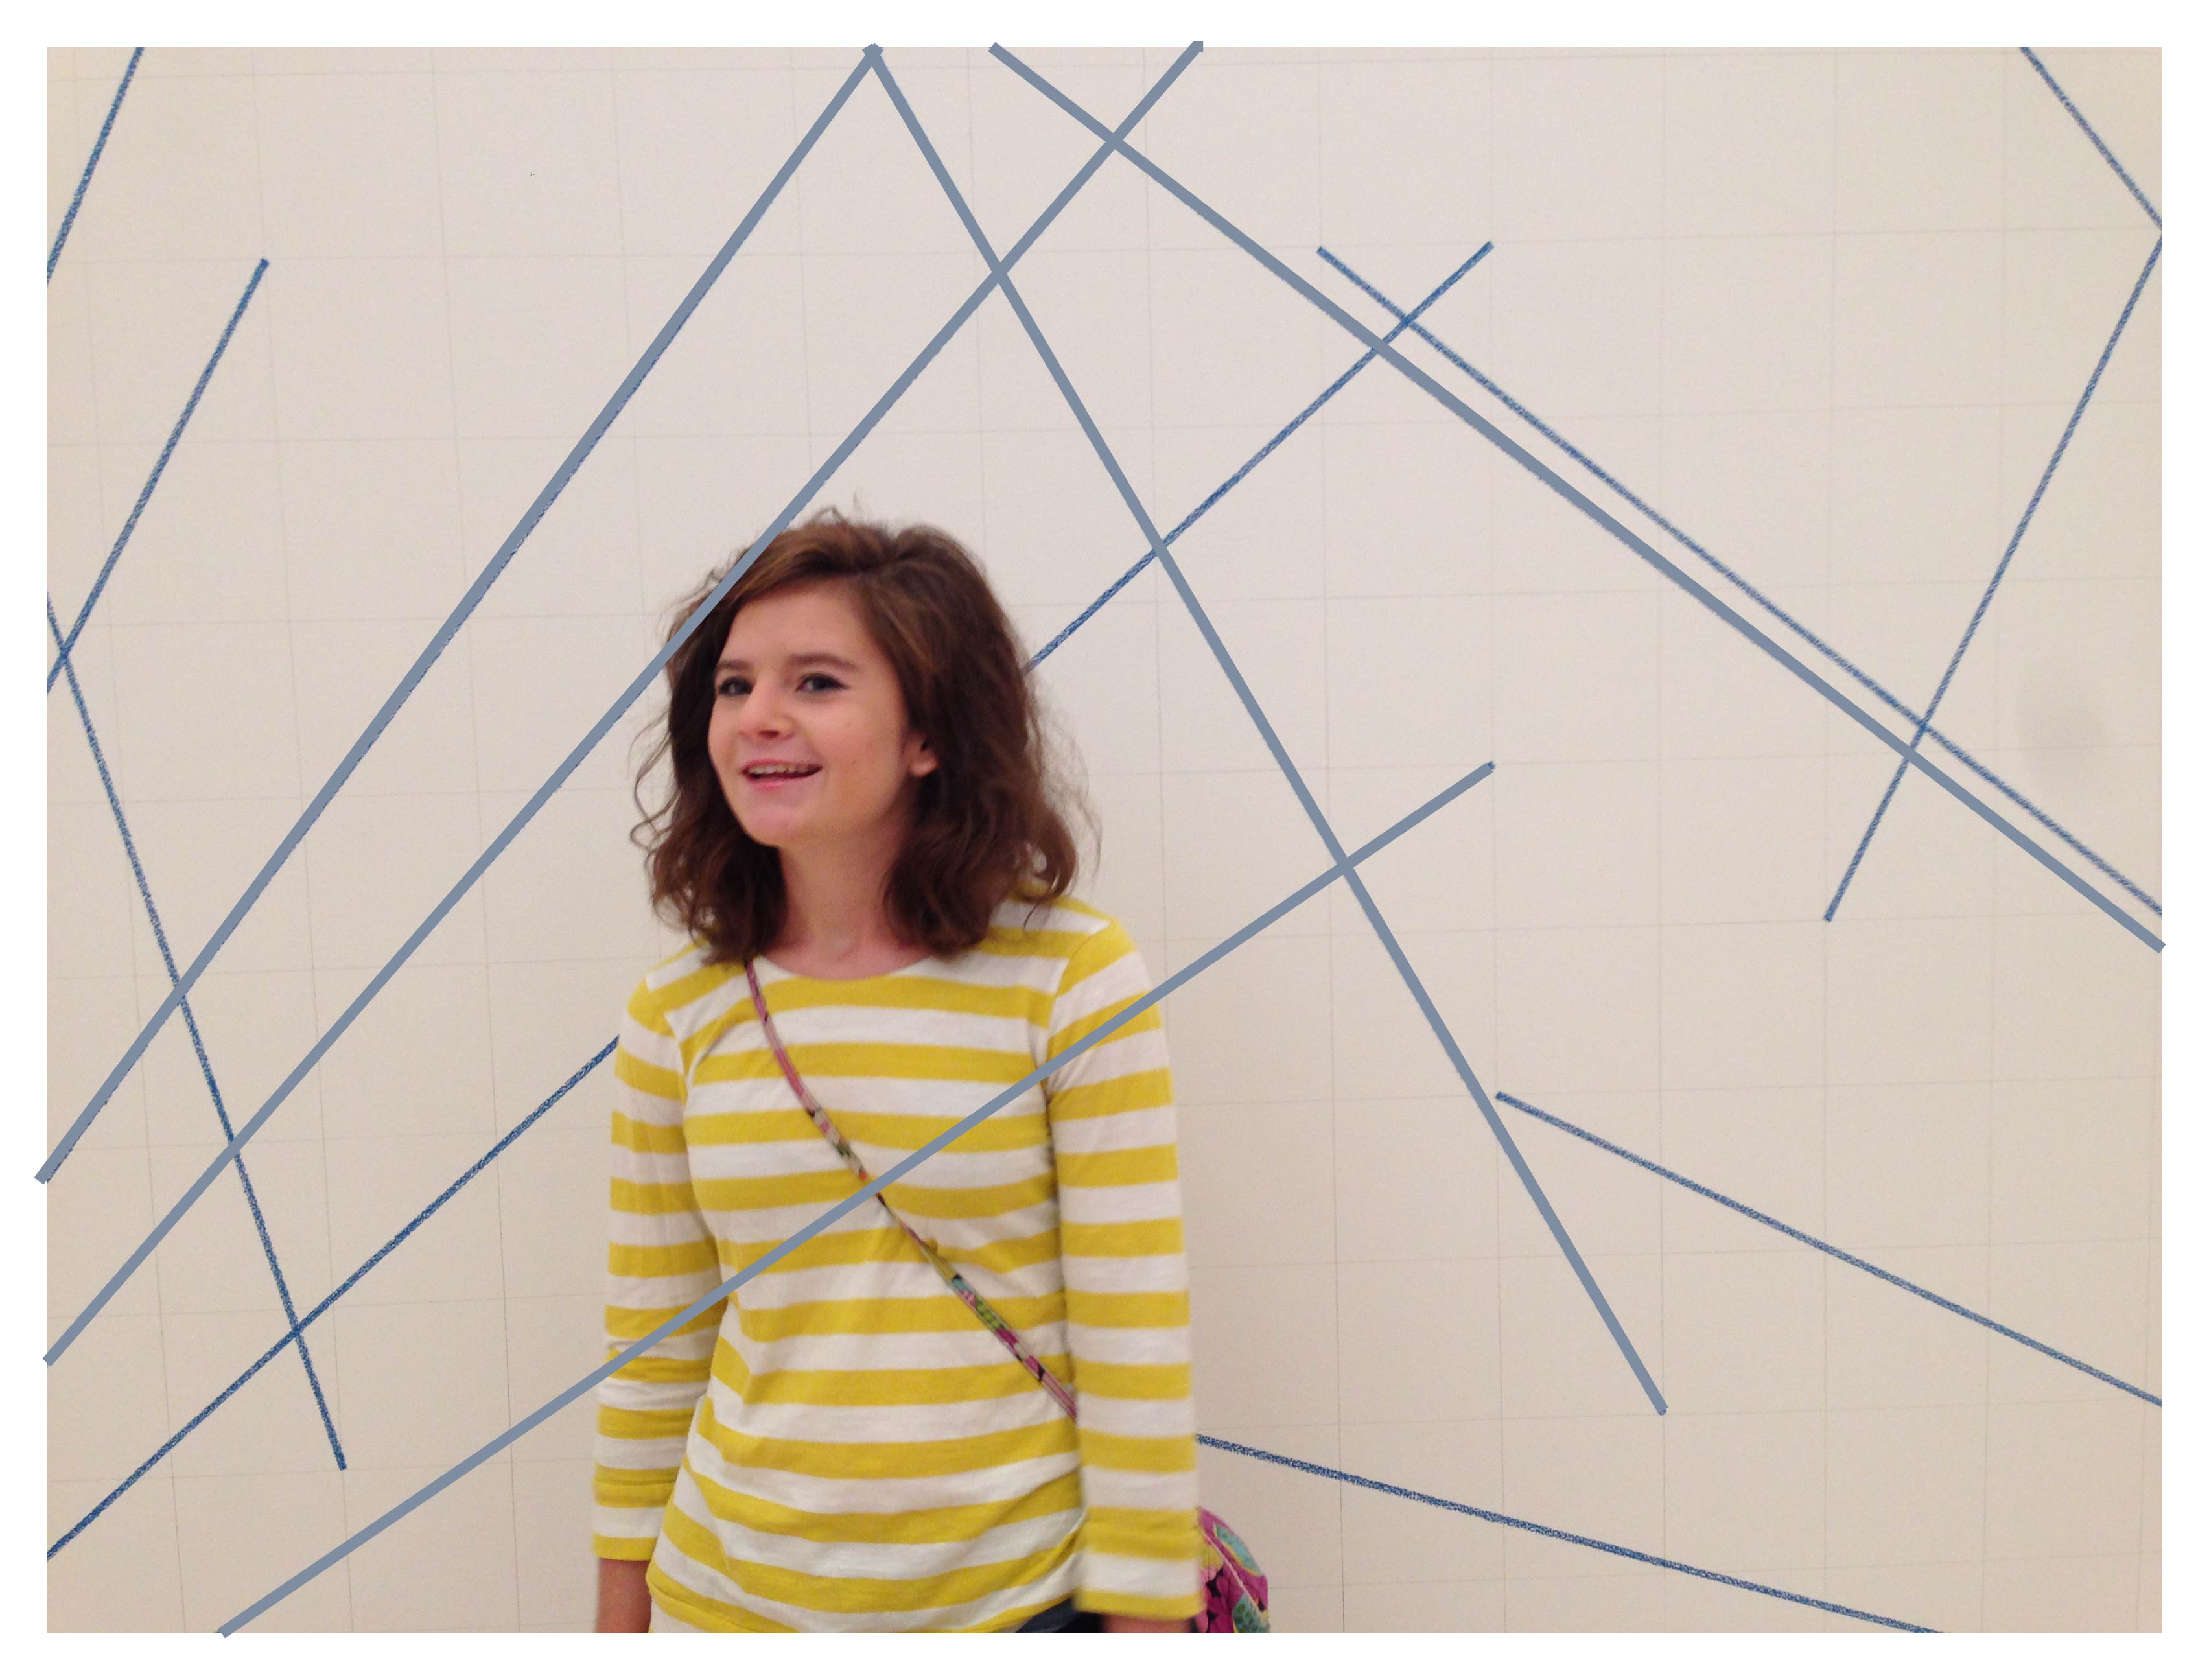 Brooke is standing in front of Sole LeWitt's Wall Drawing 273. This drawing is of blue lines on a white wall, but some of the lines have been edited to go over Brooke. She is wearing a yellow and white striped shirt.